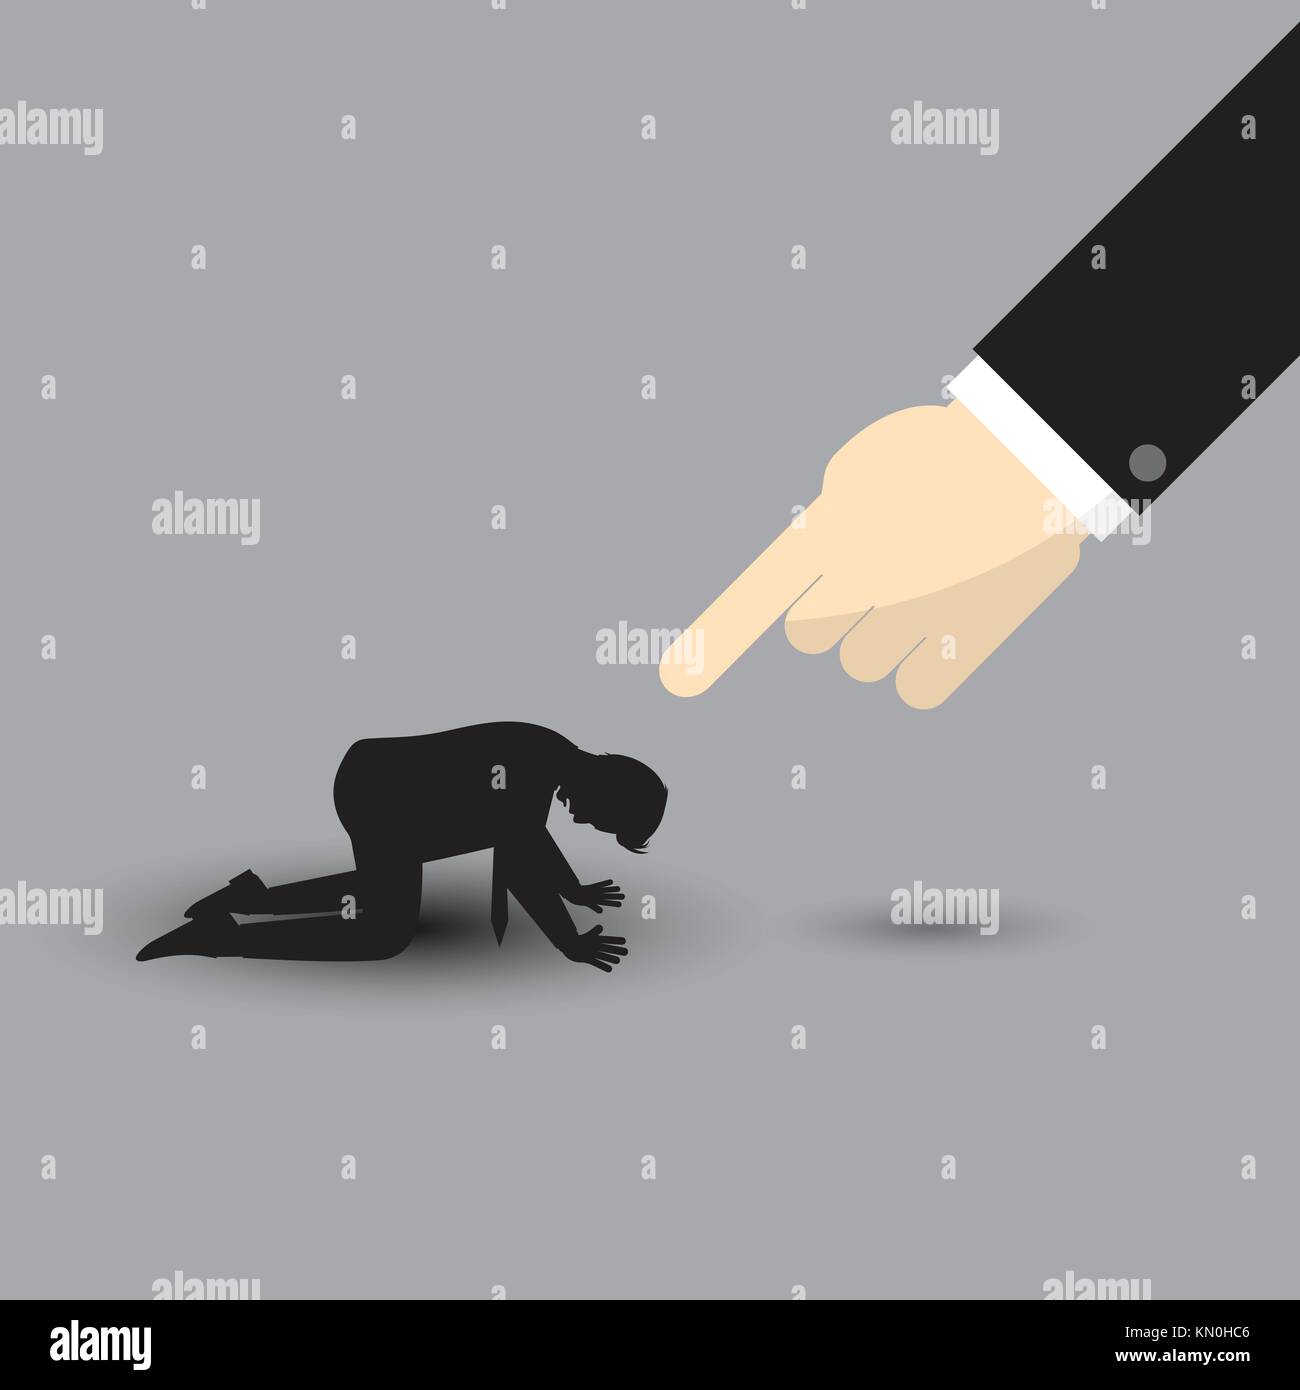 Vector Illustration Business Concept Designed As A Big Arm Pointing At Silhouette Kneeling Businessman. He Is Seriously Criticized, Blamed, Accused. Stock Vector